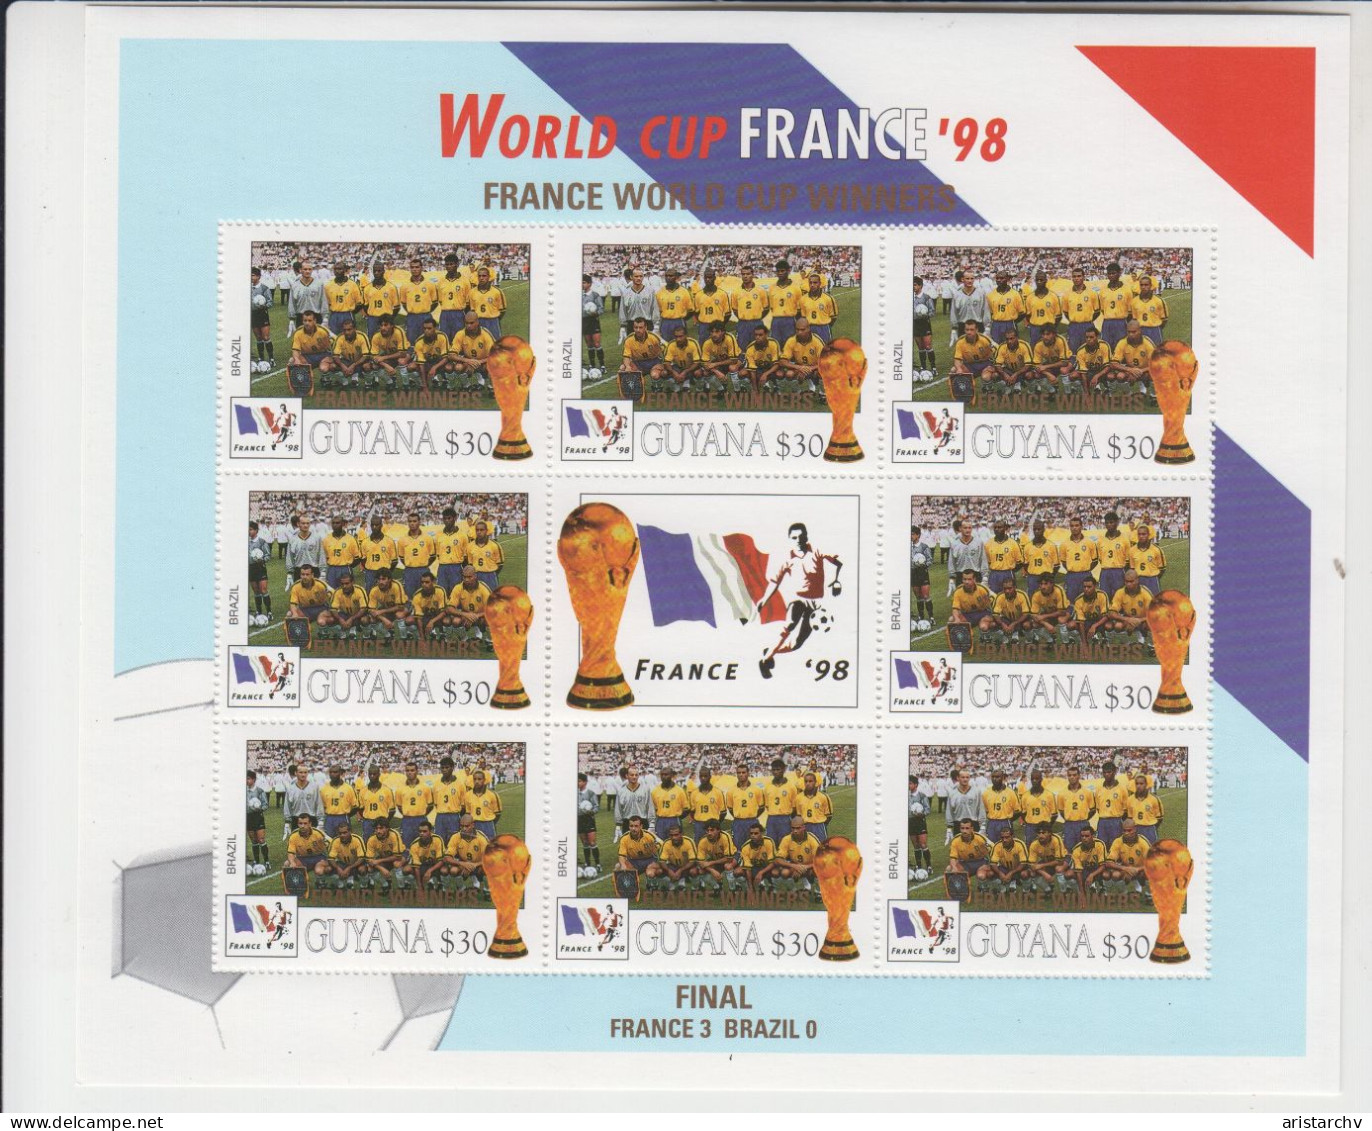 GUYANA 1998 FOOTBALL WORLD CUP 8 STAMPS AND 8 SHEETLETS OVERPRINT - 1998 – Frankreich